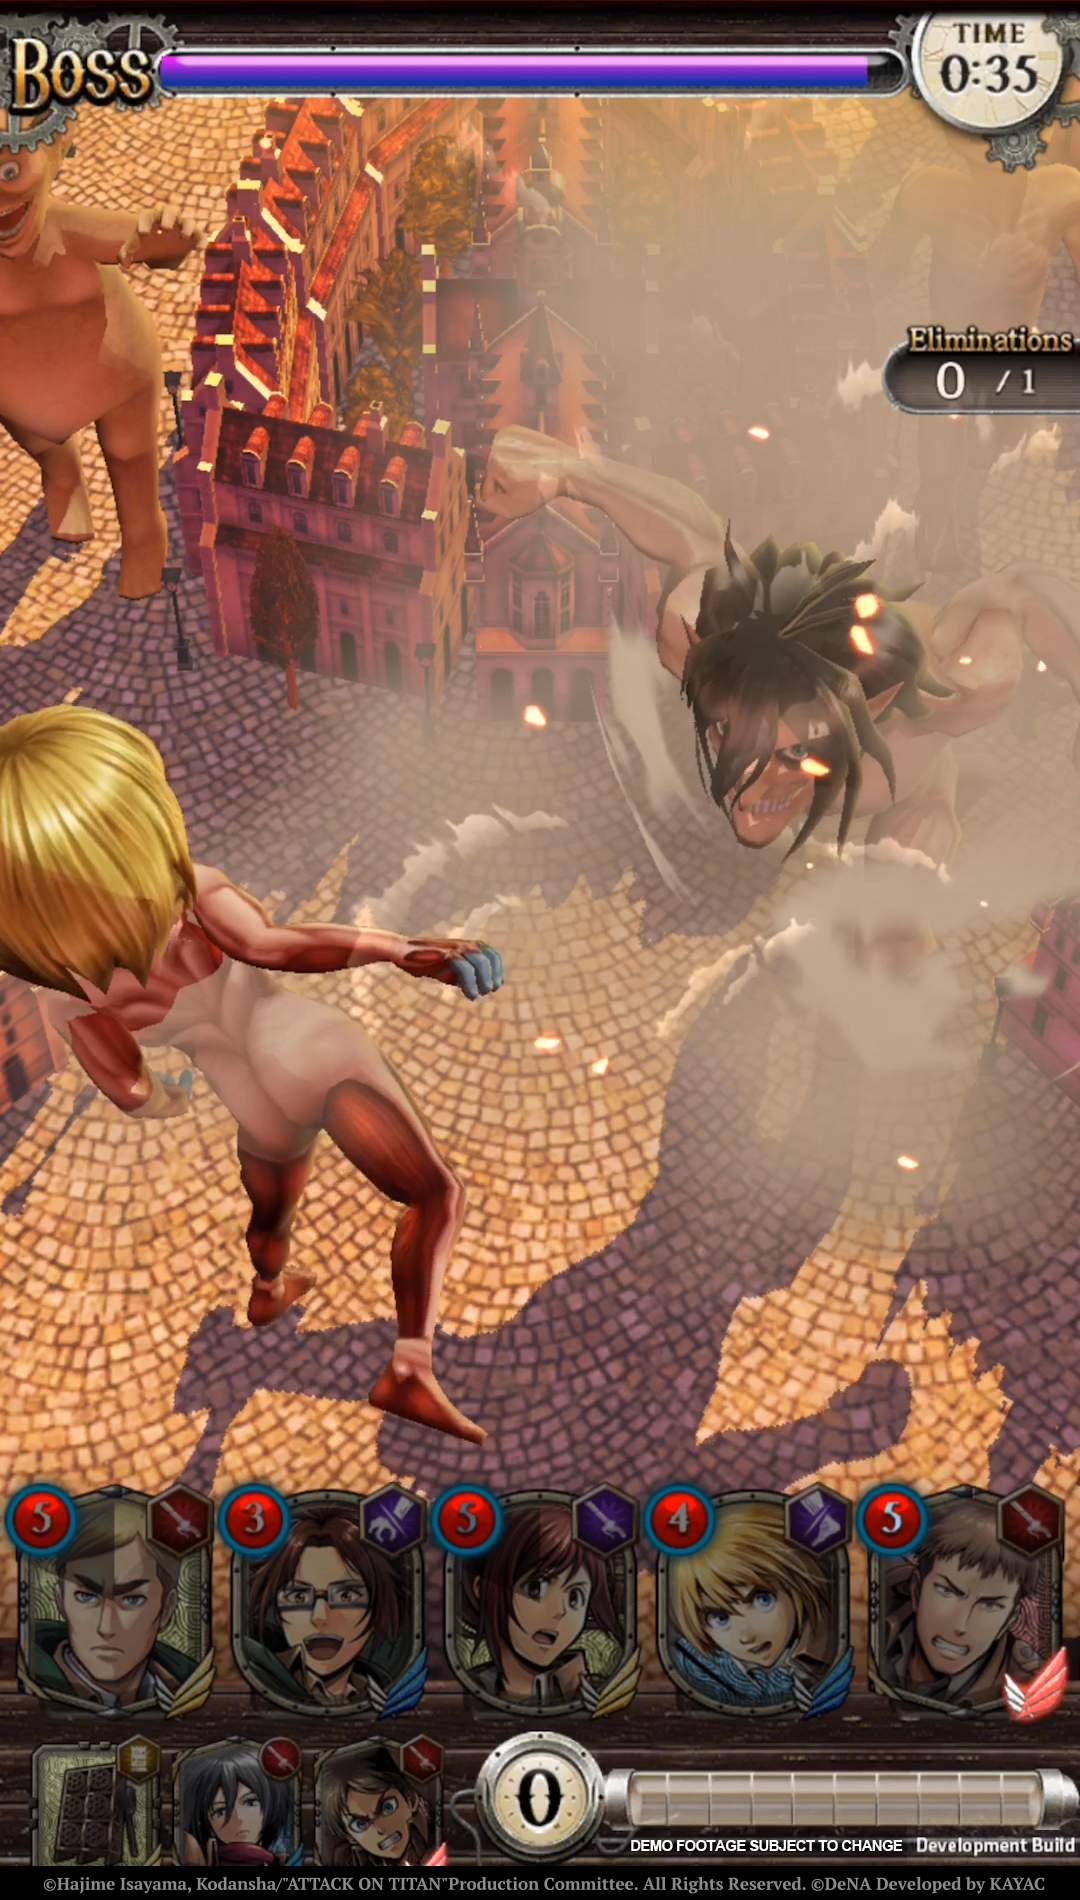 Attack on Titan Online Browser Game Recruits Beta Testers - Interest -  Anime News Network